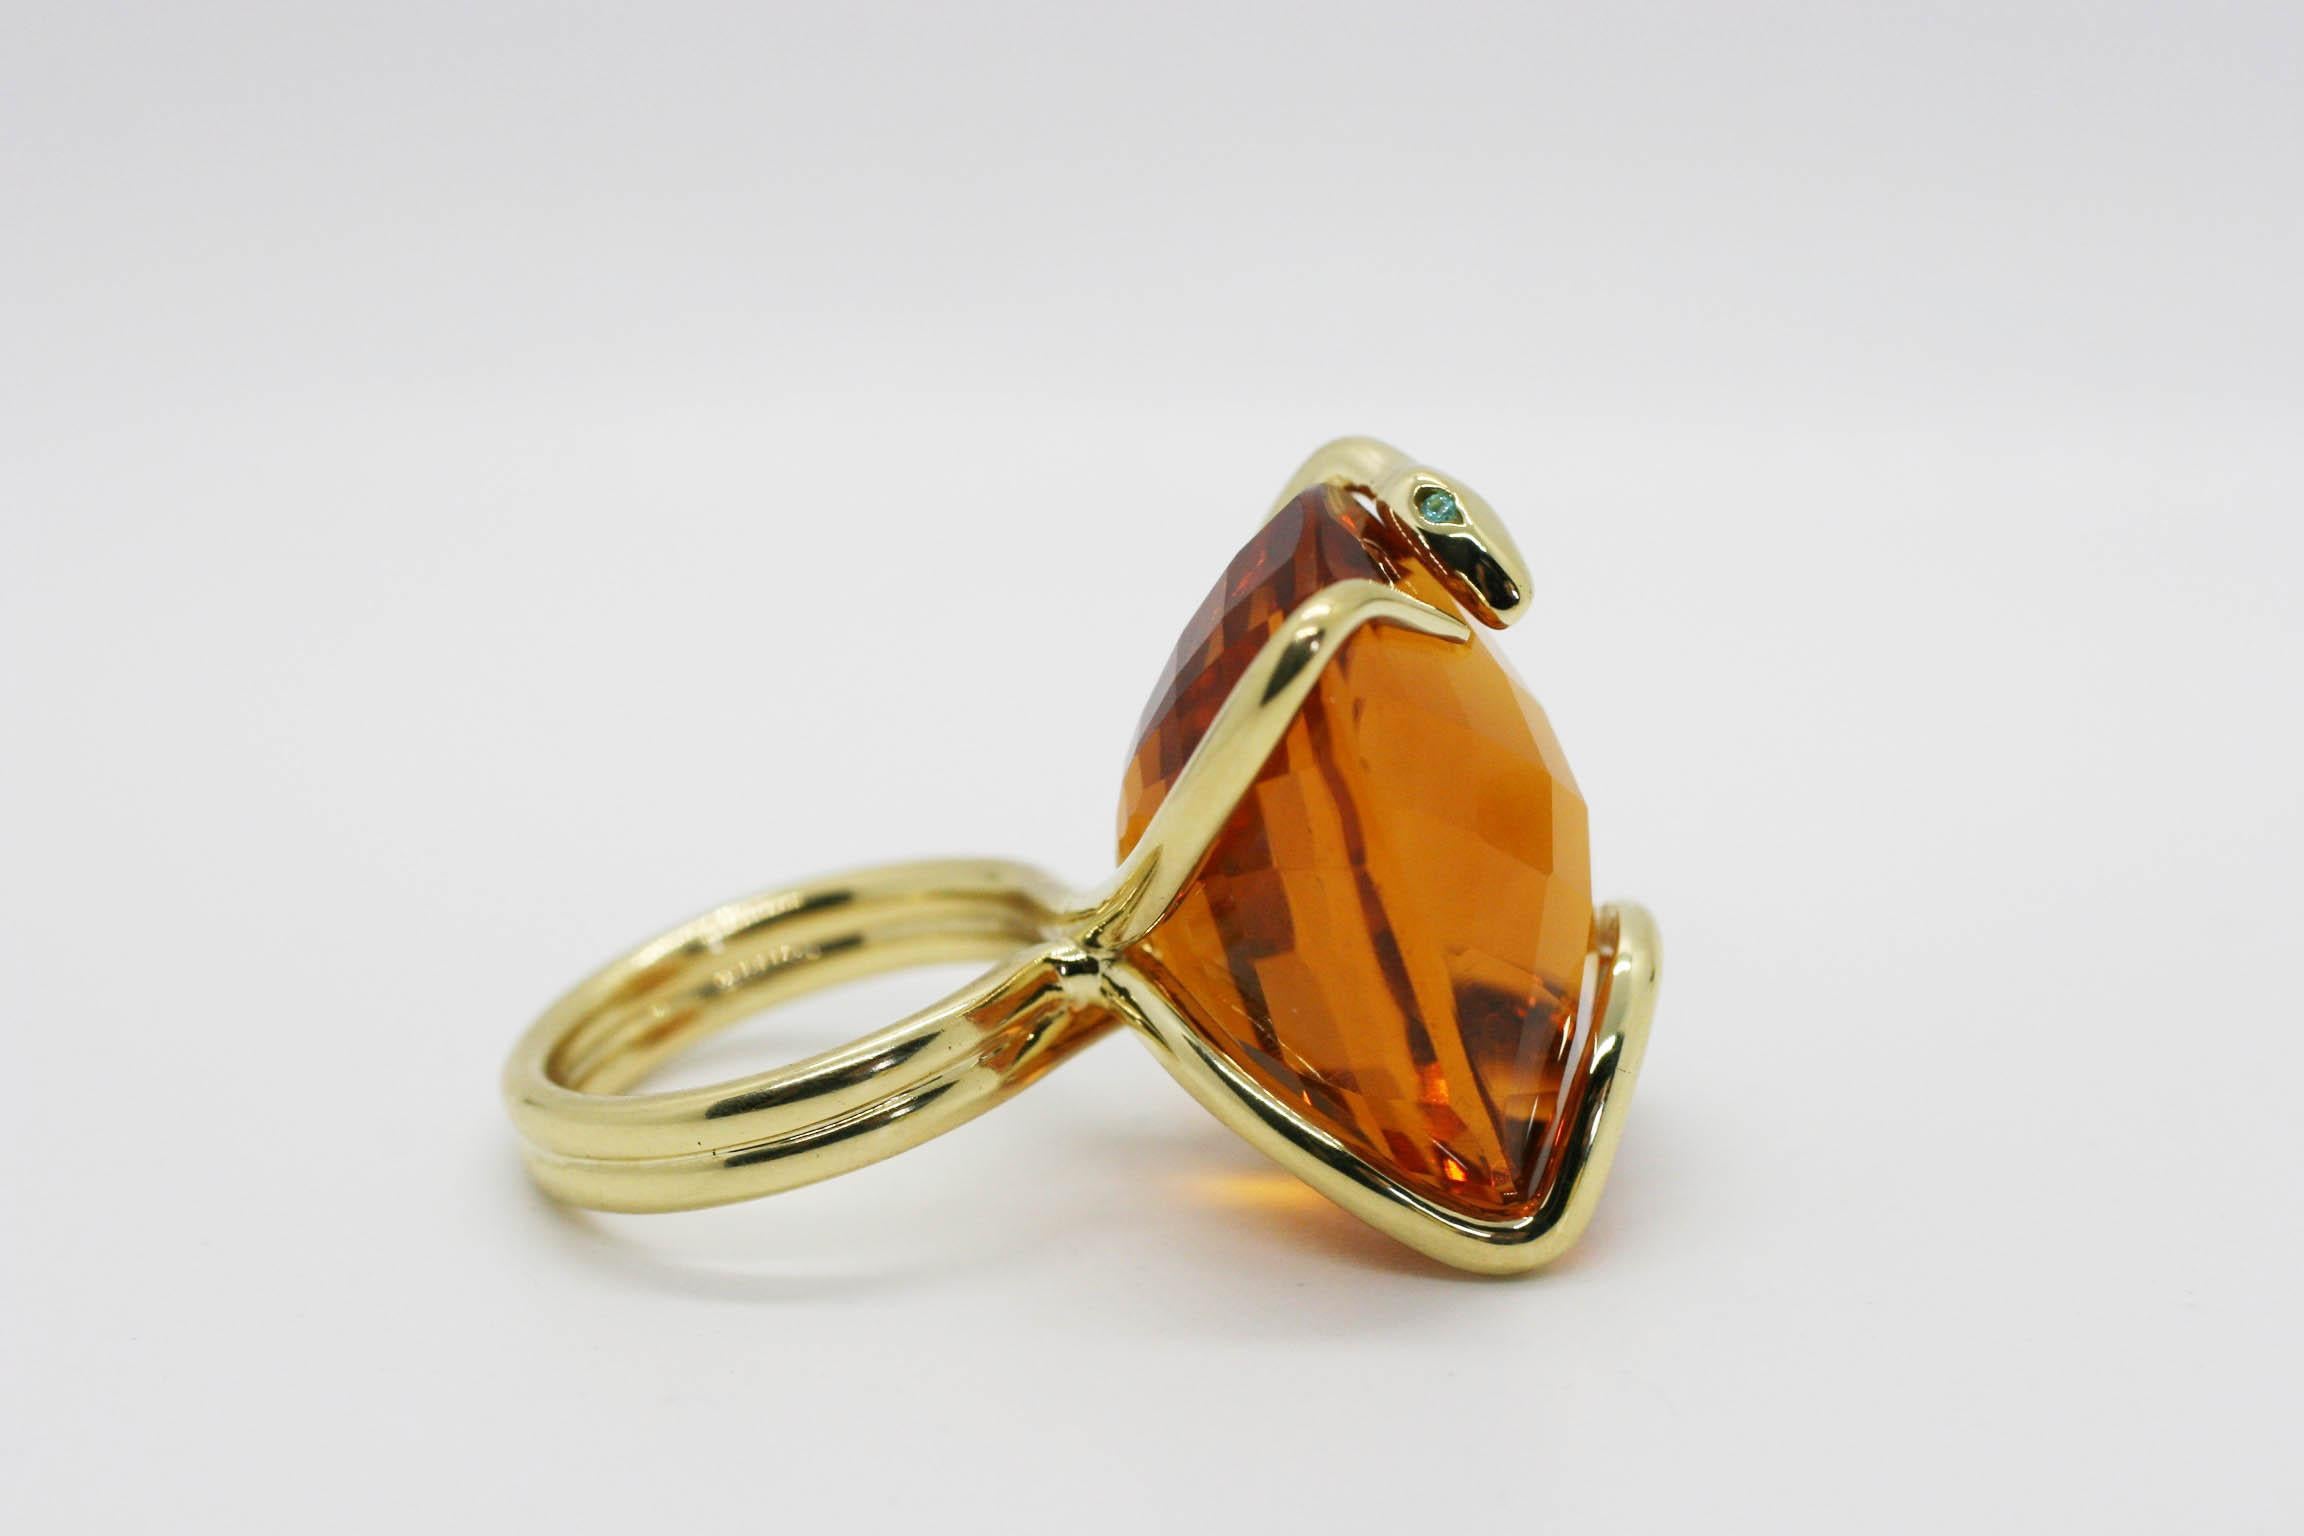 Perez Bitan's Infinity Citrine Snake Cocktail Ring features Perez Bitan's signature curved snake with tourmaline eyes that wraps around the finger and frames the large Madeira citrine, set in 18k Yellow Gold
Over 47 carats Madeira Citrine from